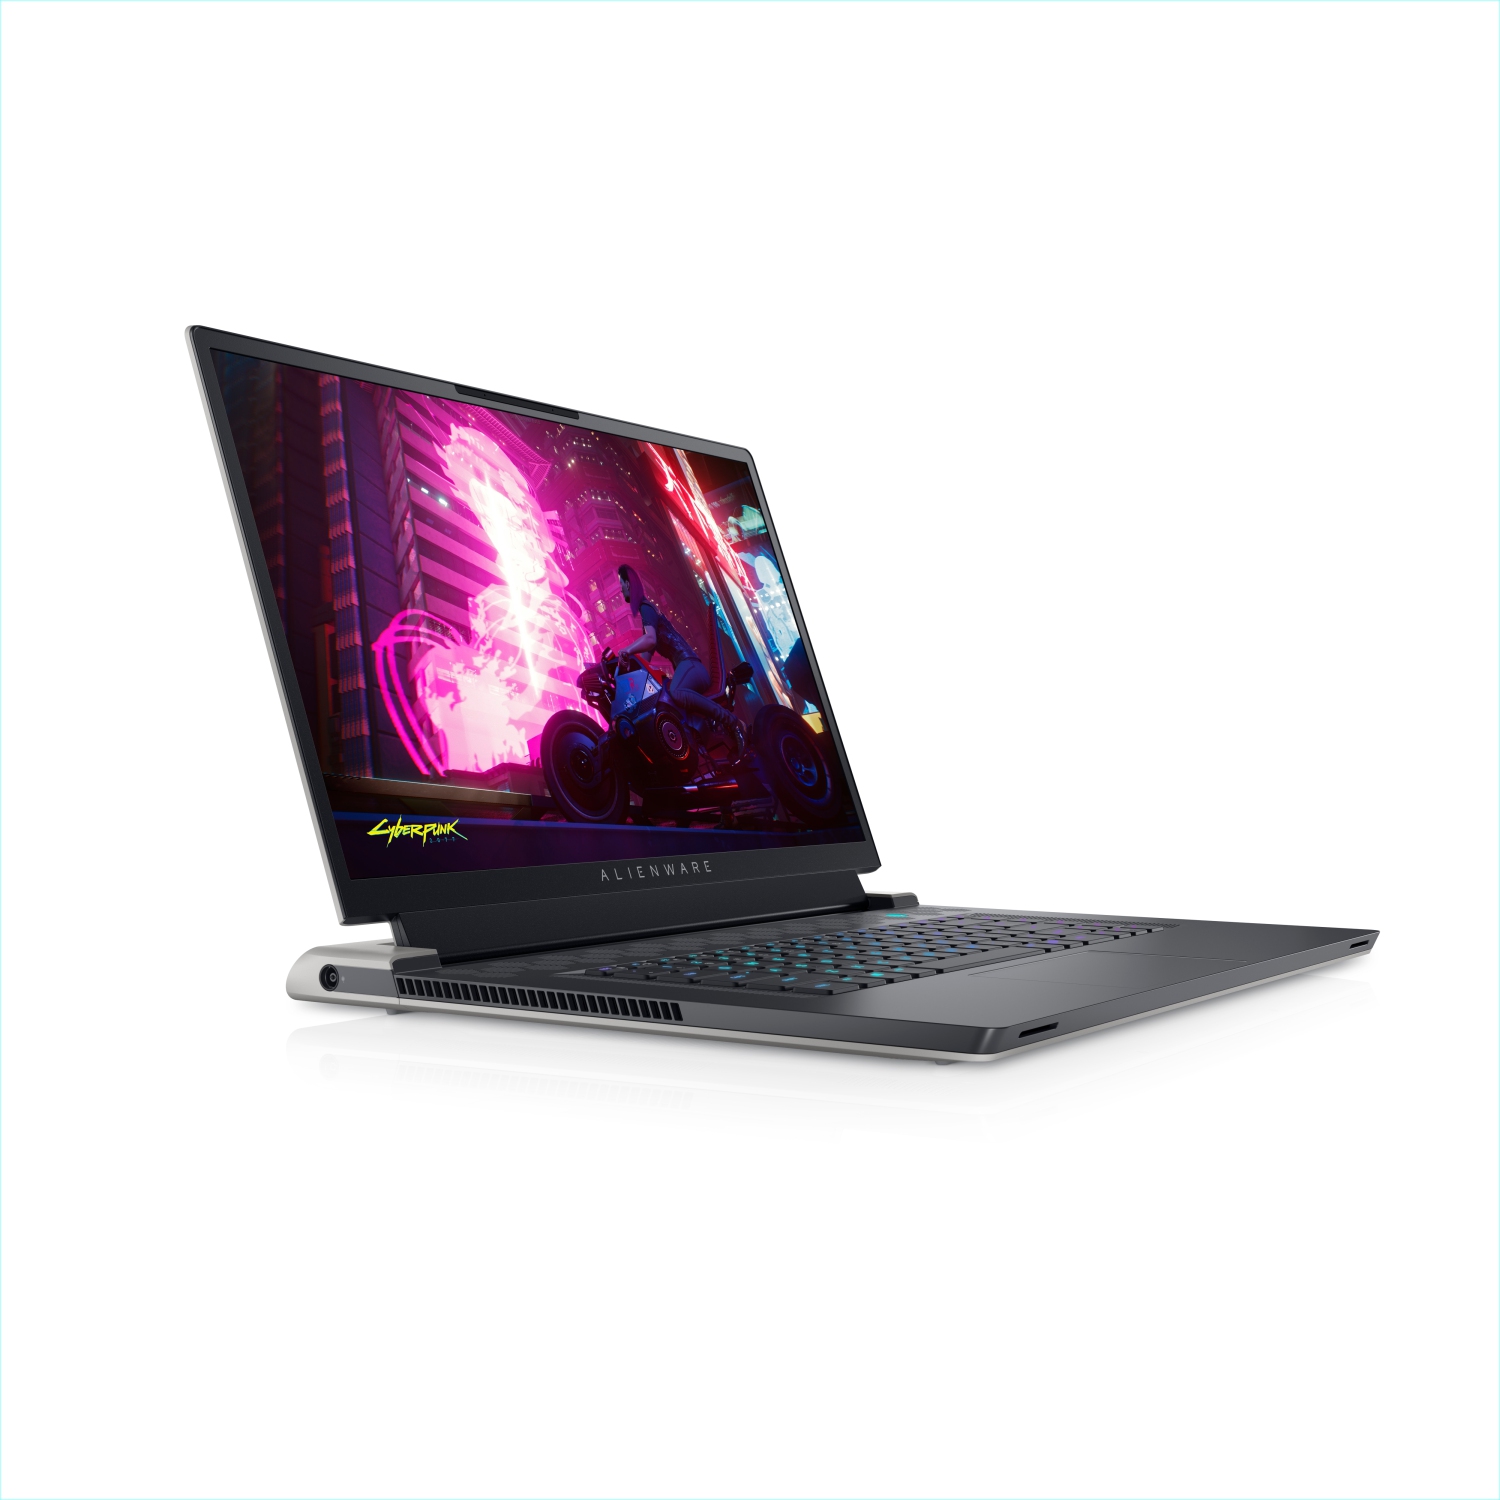 Refurbished (Excellent) - Dell Alienware X17 R1 Gaming Laptop (2021), 17.3" FHD, Core i7, 256GB SSD, 16GB RAM, RTX 3060, 8 Cores @ 4.6 GHz, 11th Gen CPU Certified